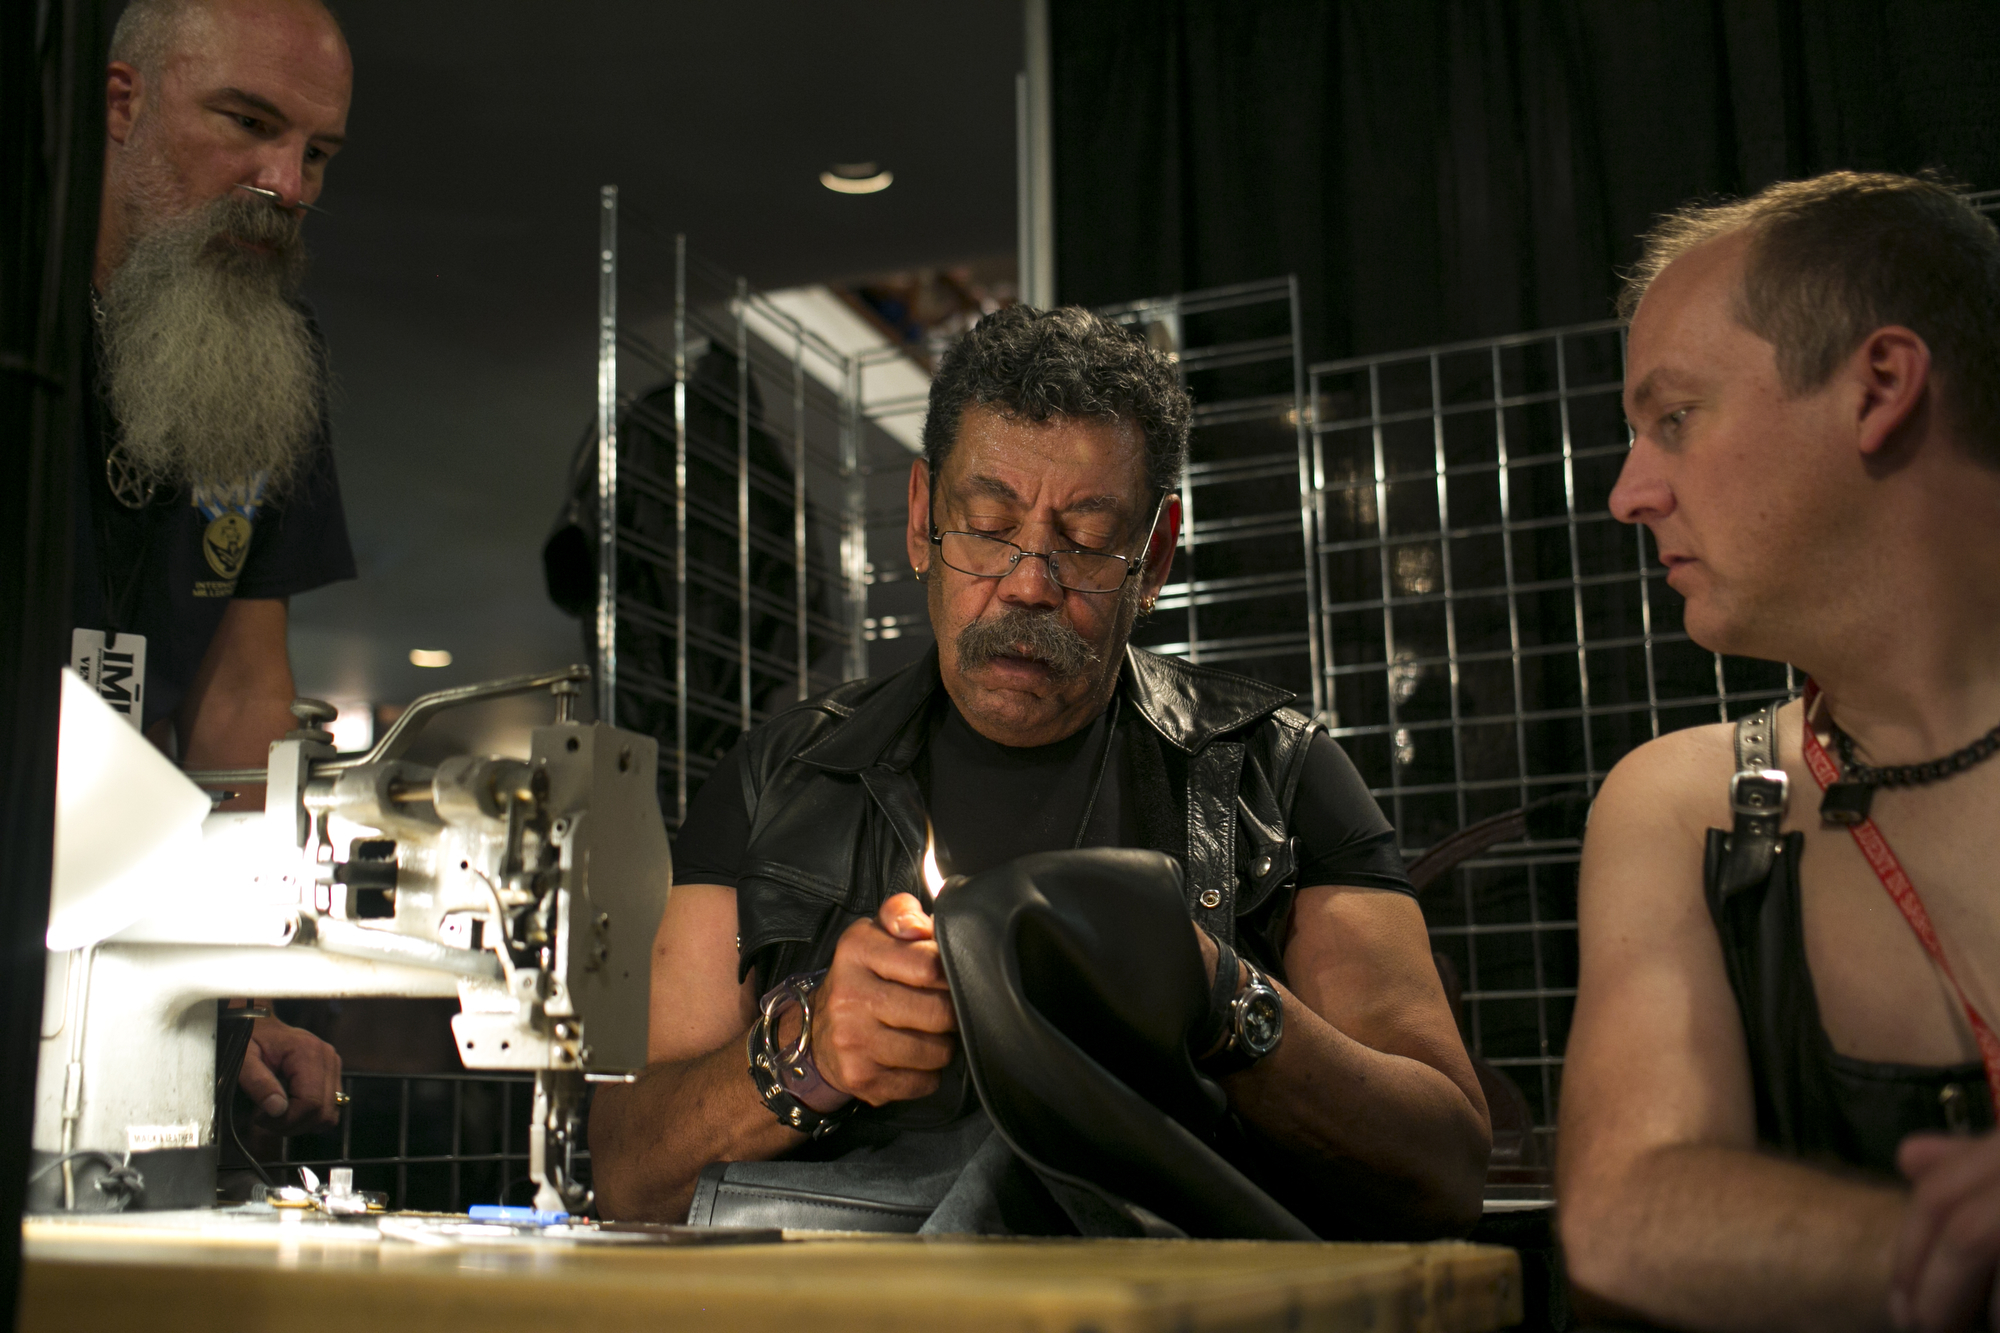  CJ, center, of CJ's Leather from Denver, repairs a vest duringThe 38th Annual International Mr. Leather held at The Congress Plaza Hotel in Chicago, on Sunday, May 29th, 2016. 